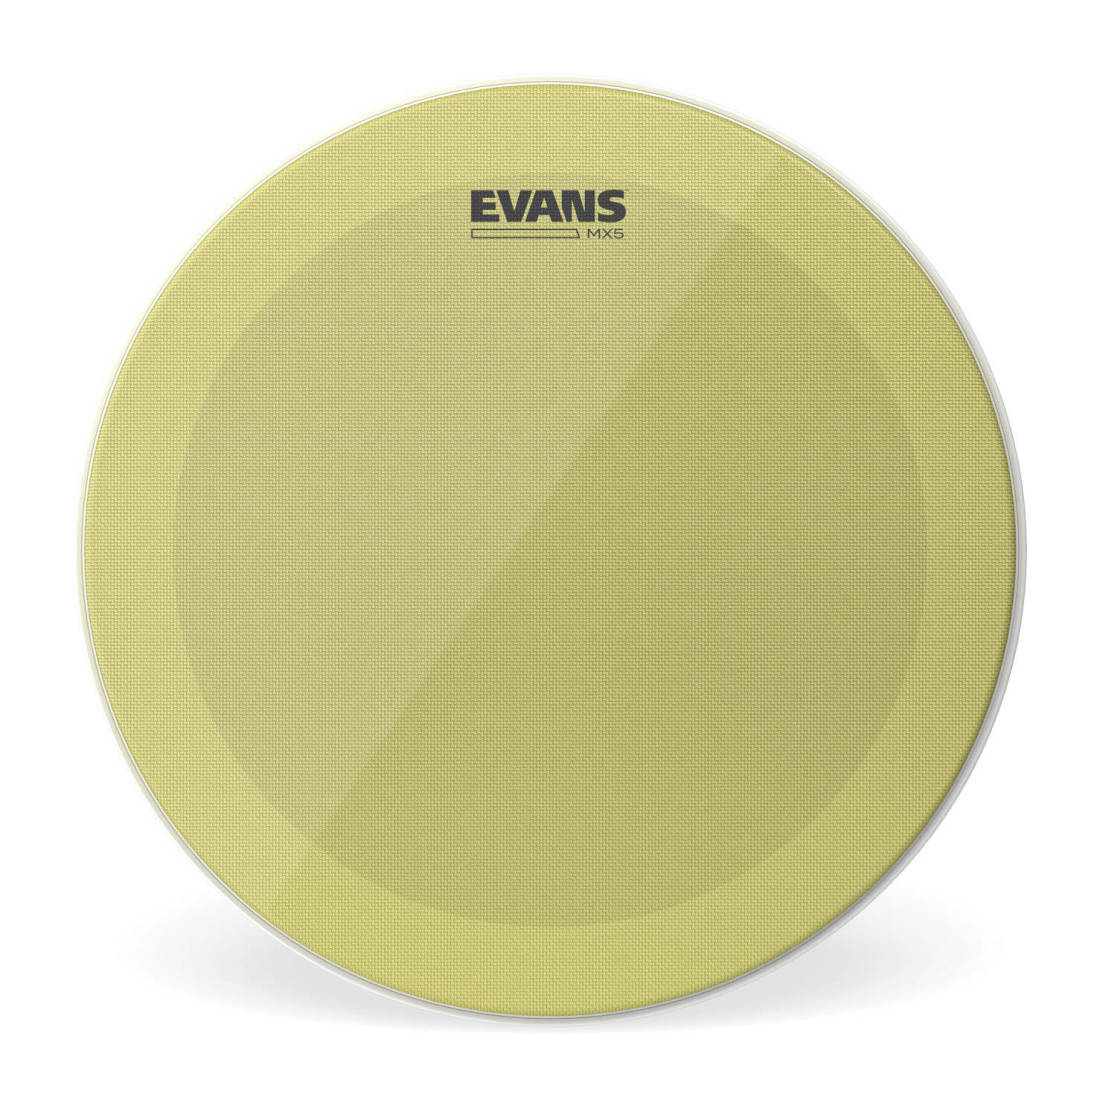 SS13MX5 - Evans MX5 Marching Snare Side Drum Head, 13 Inch